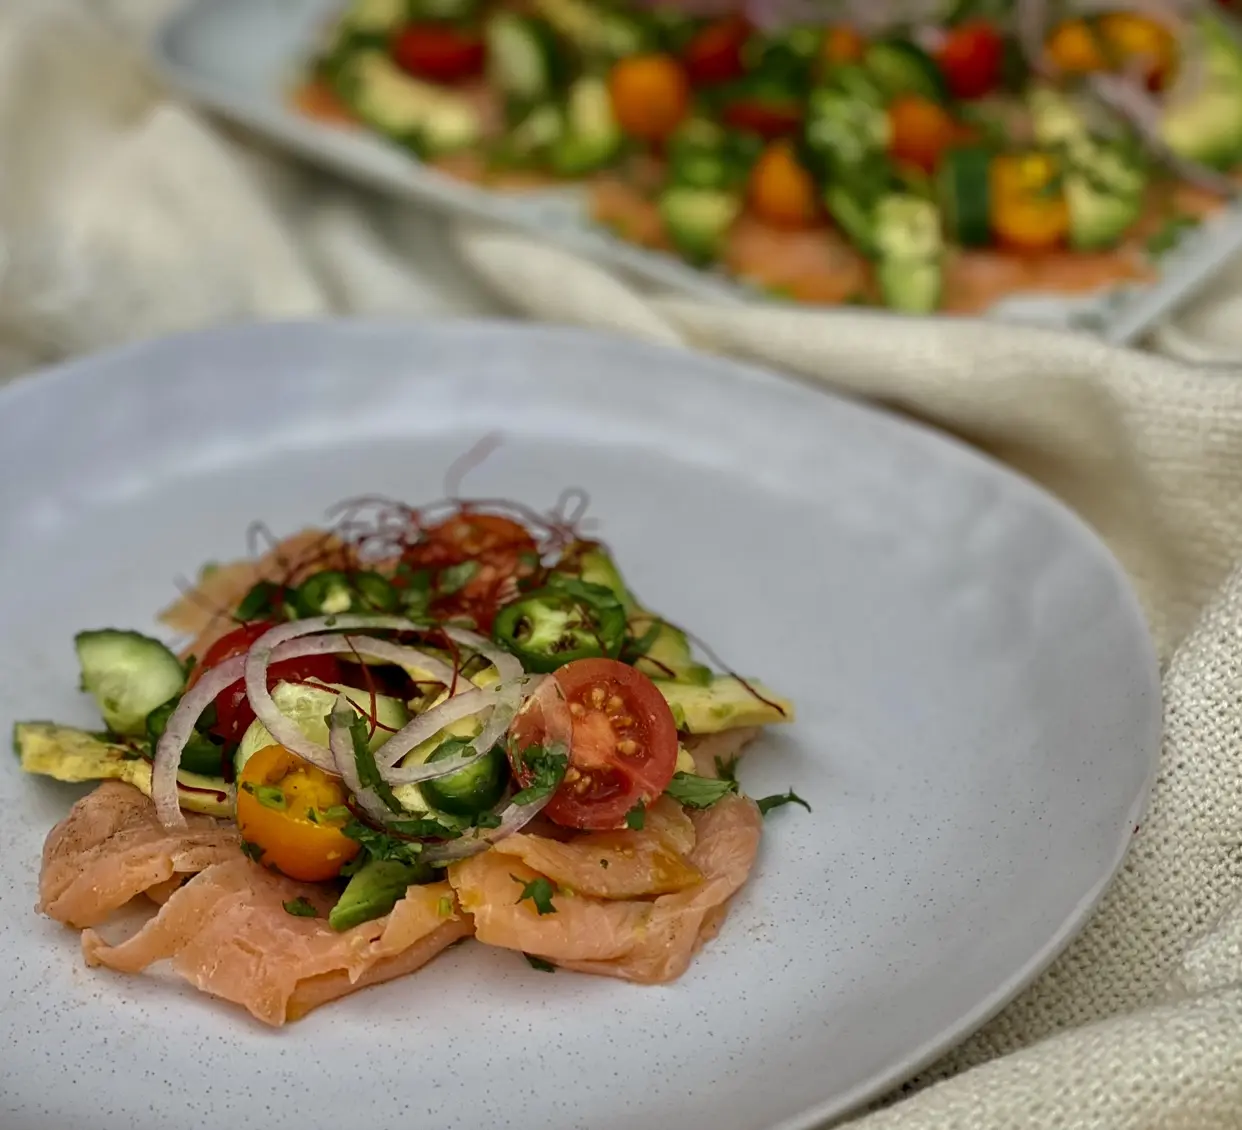 smoked salmon ceviche recipe - What is the best fish to use for ceviche